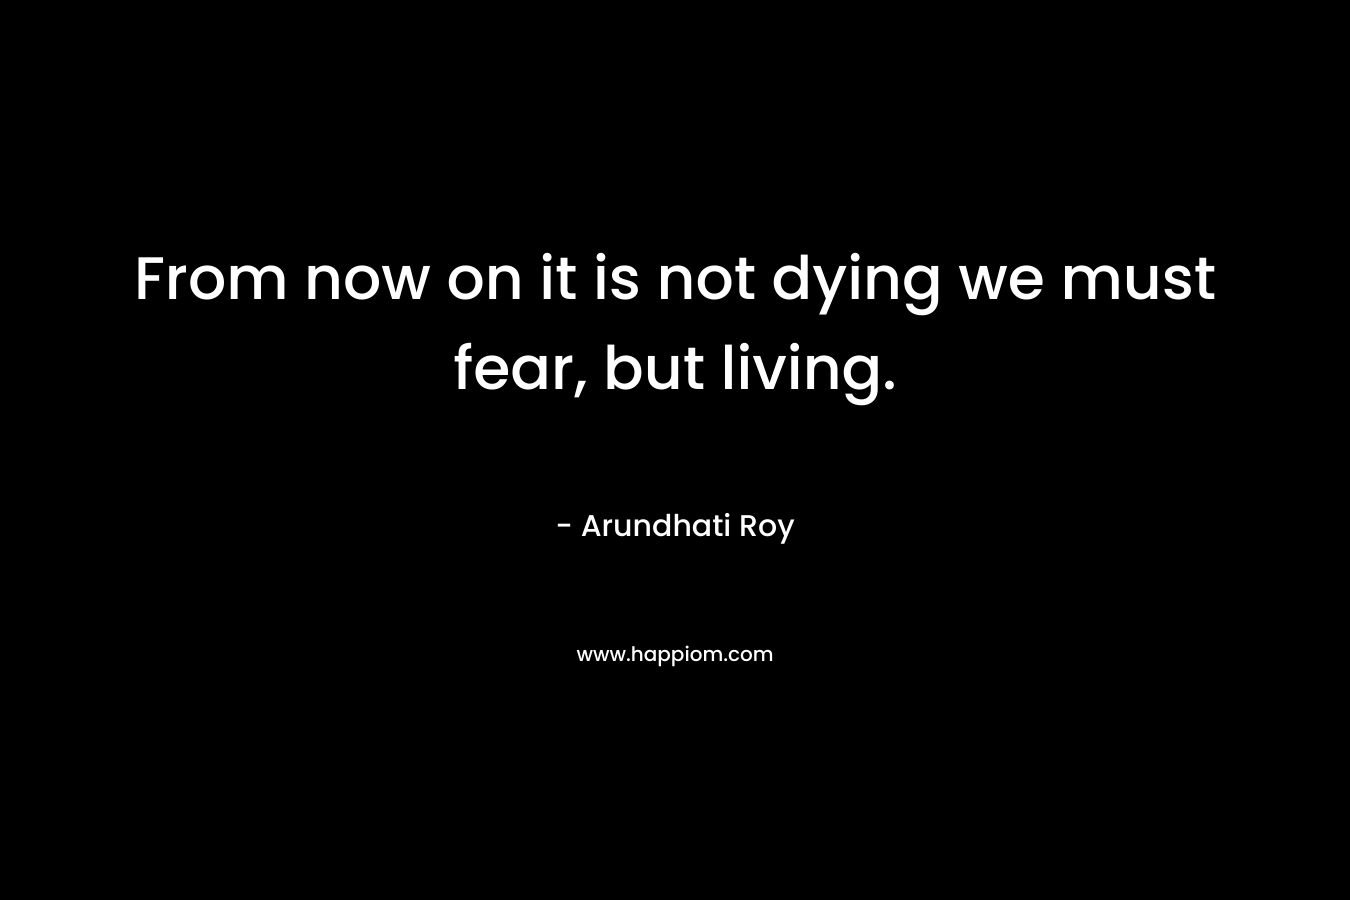 From now on it is not dying we must fear, but living.